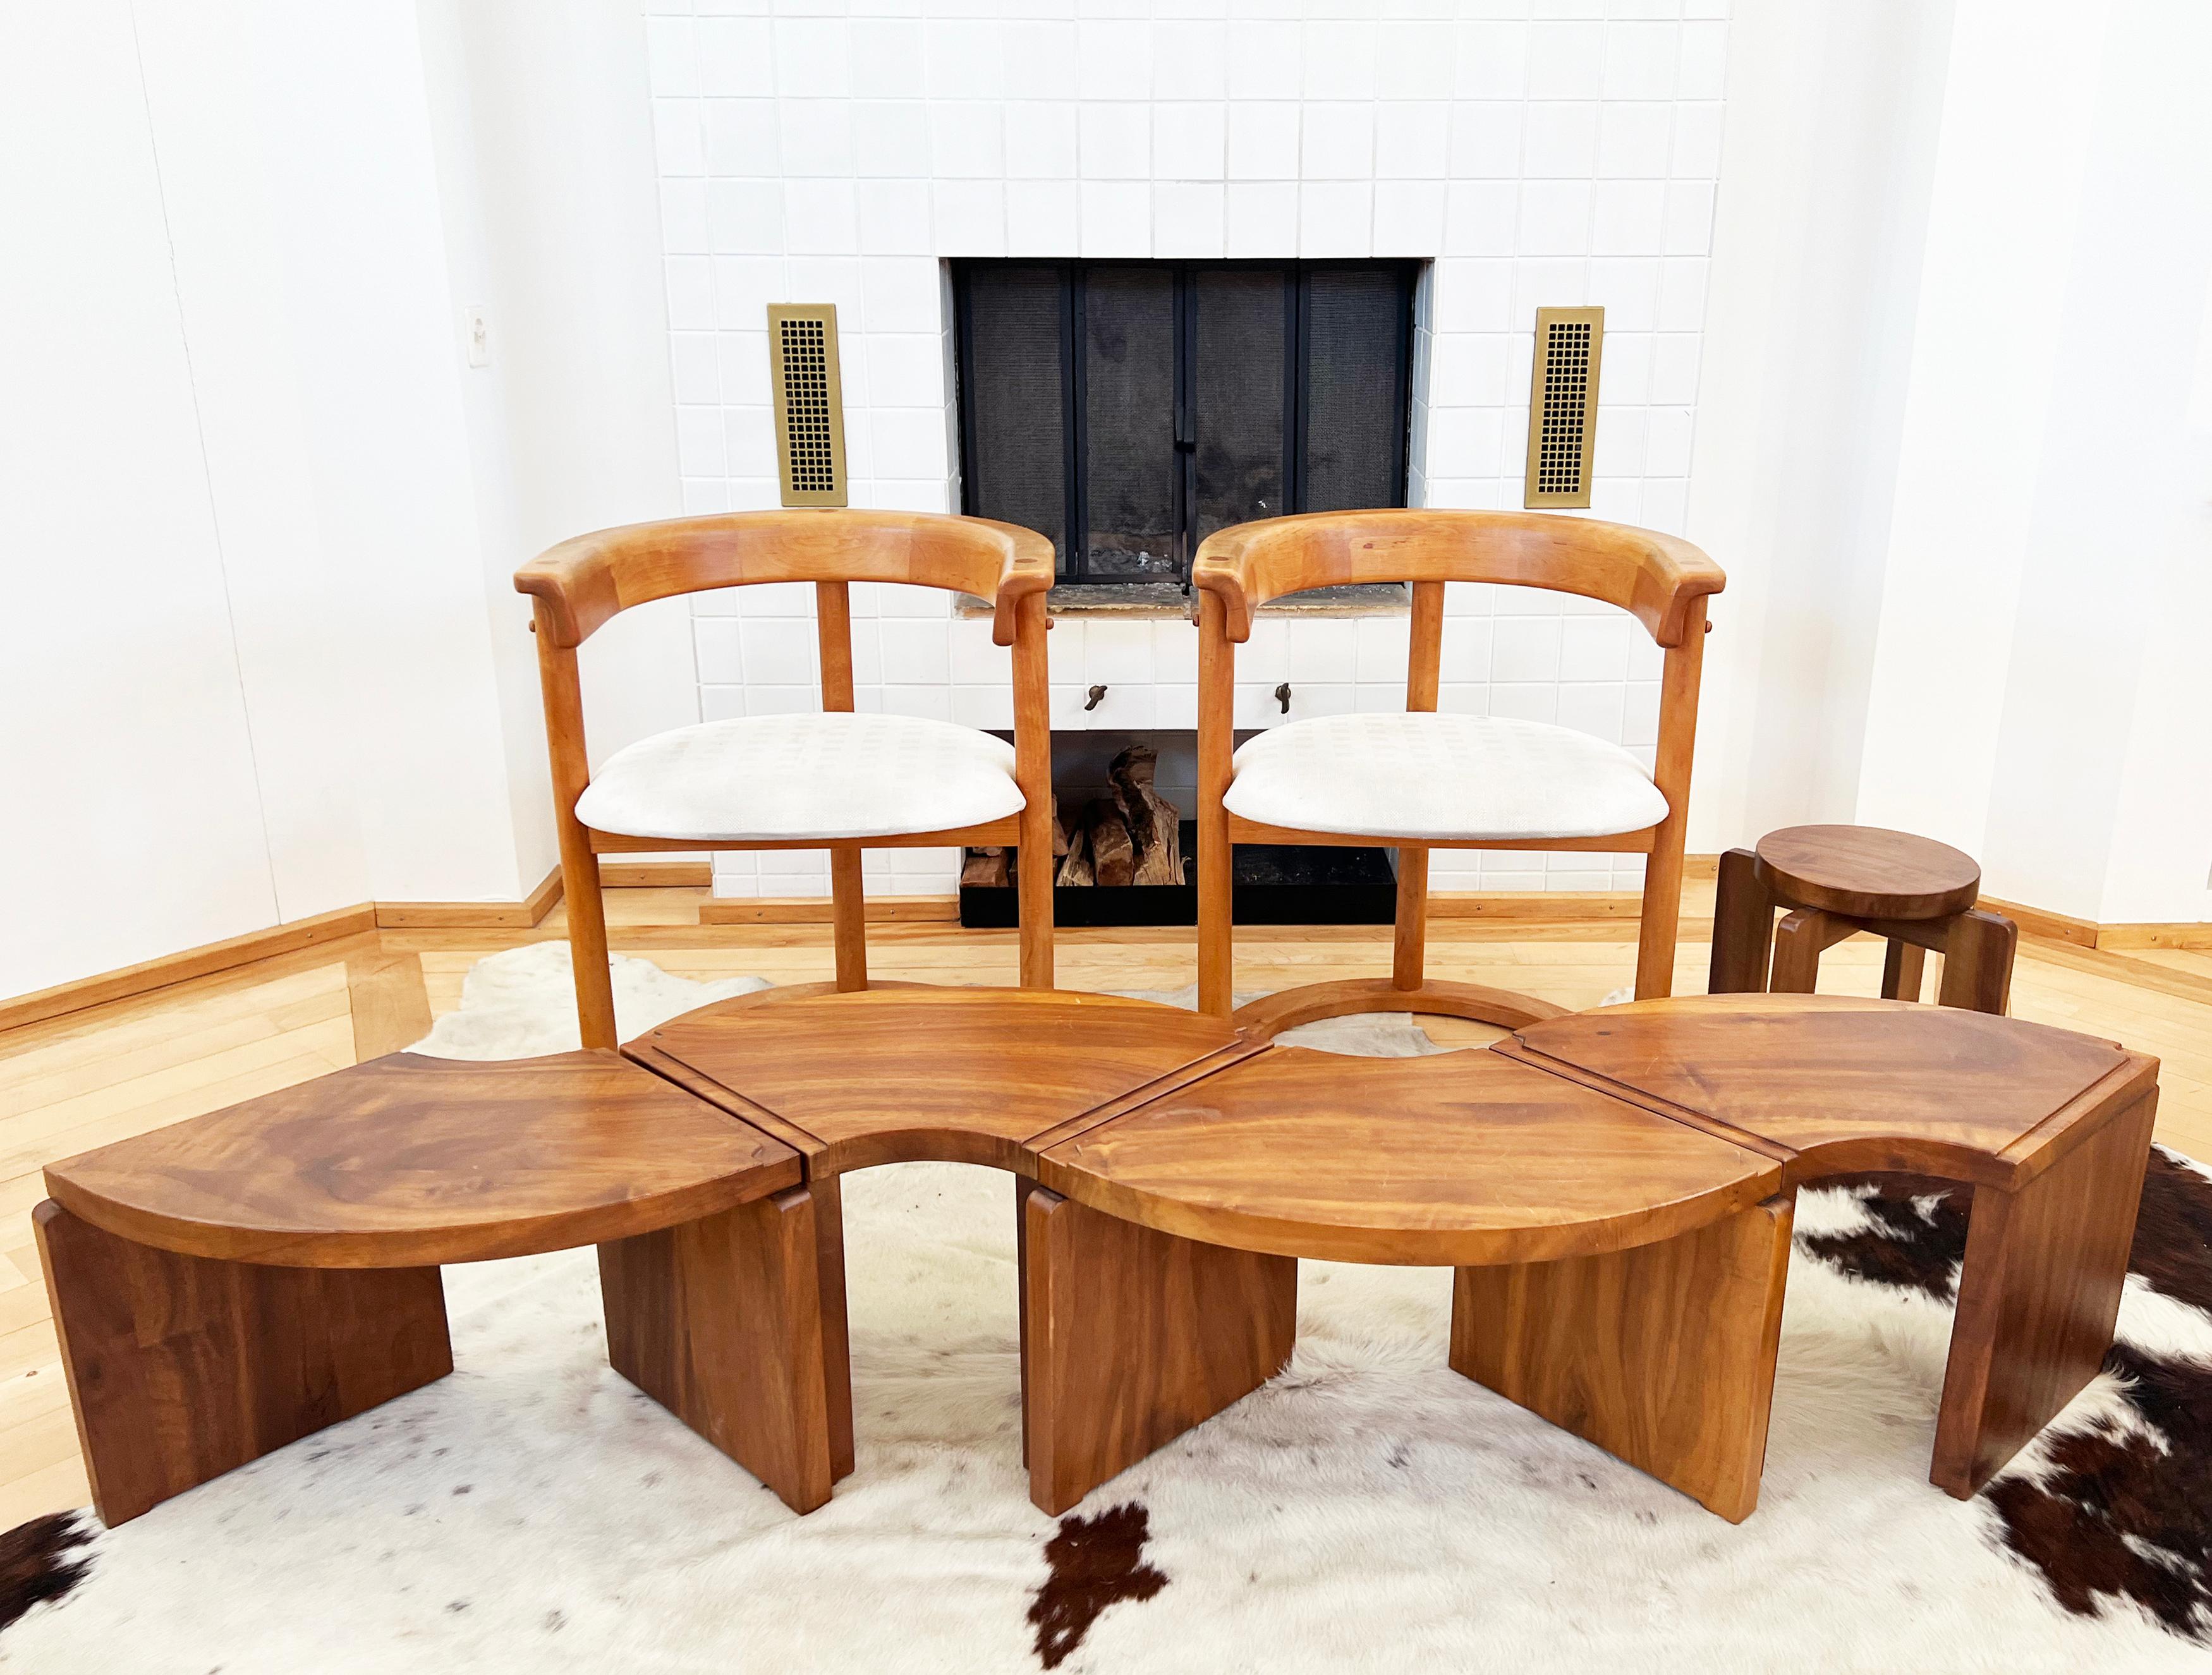 Incredible, completely stunning design. Solid walnut 5 piece set in the manner of Harvey Probber-- “Nuclear” modular coffee table. Transforms from one round modular coffee table into separate seats seats or a long bench. Designed in 1949 by Harvey